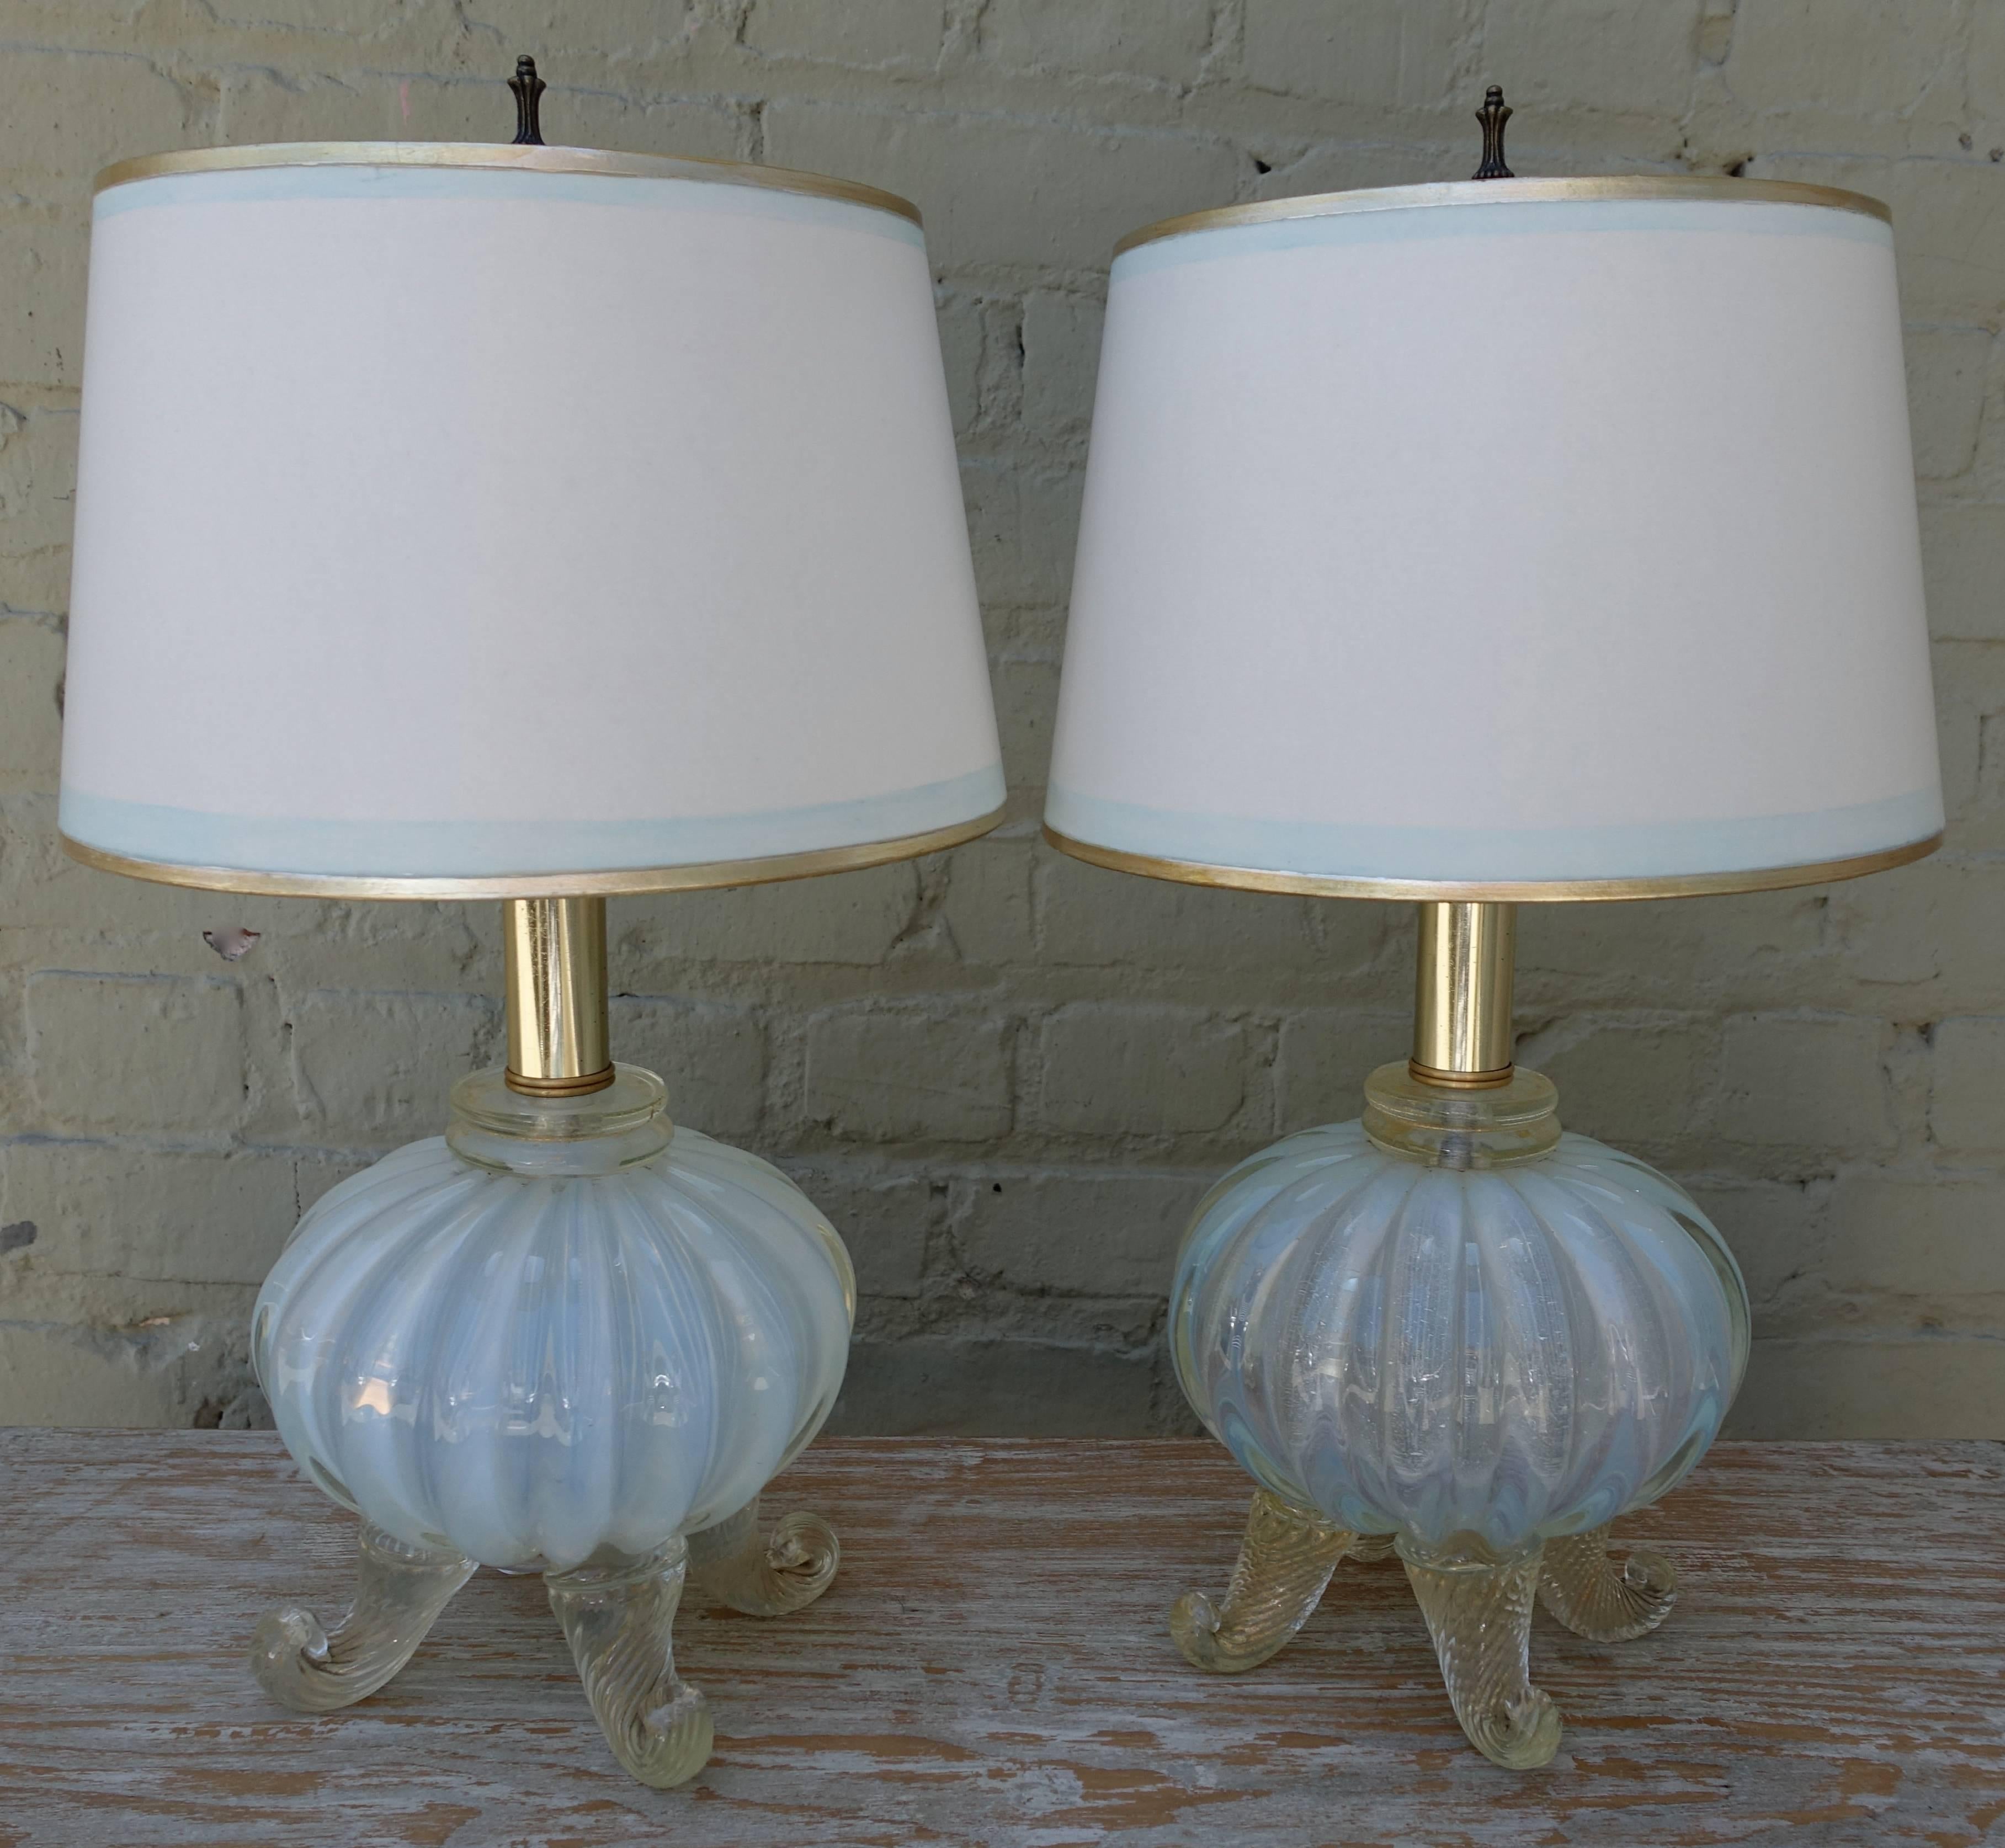 Pair of Murano lamps. Shade size: 11